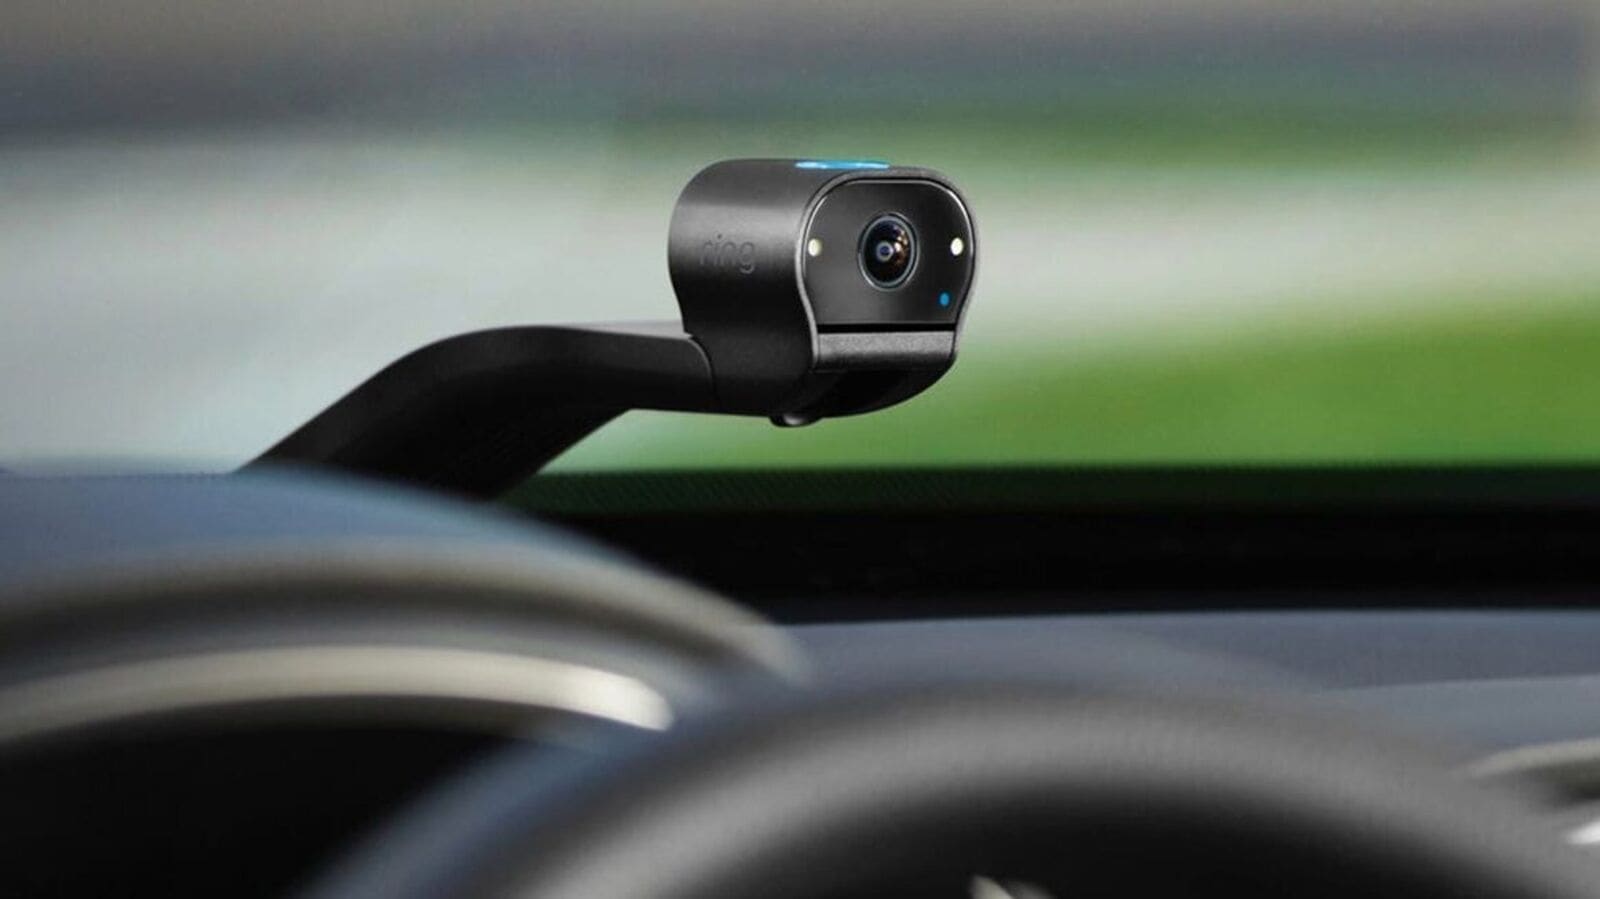 CES 2023 Amazon launches new dashboard camera that can prevent car theft HT Auto